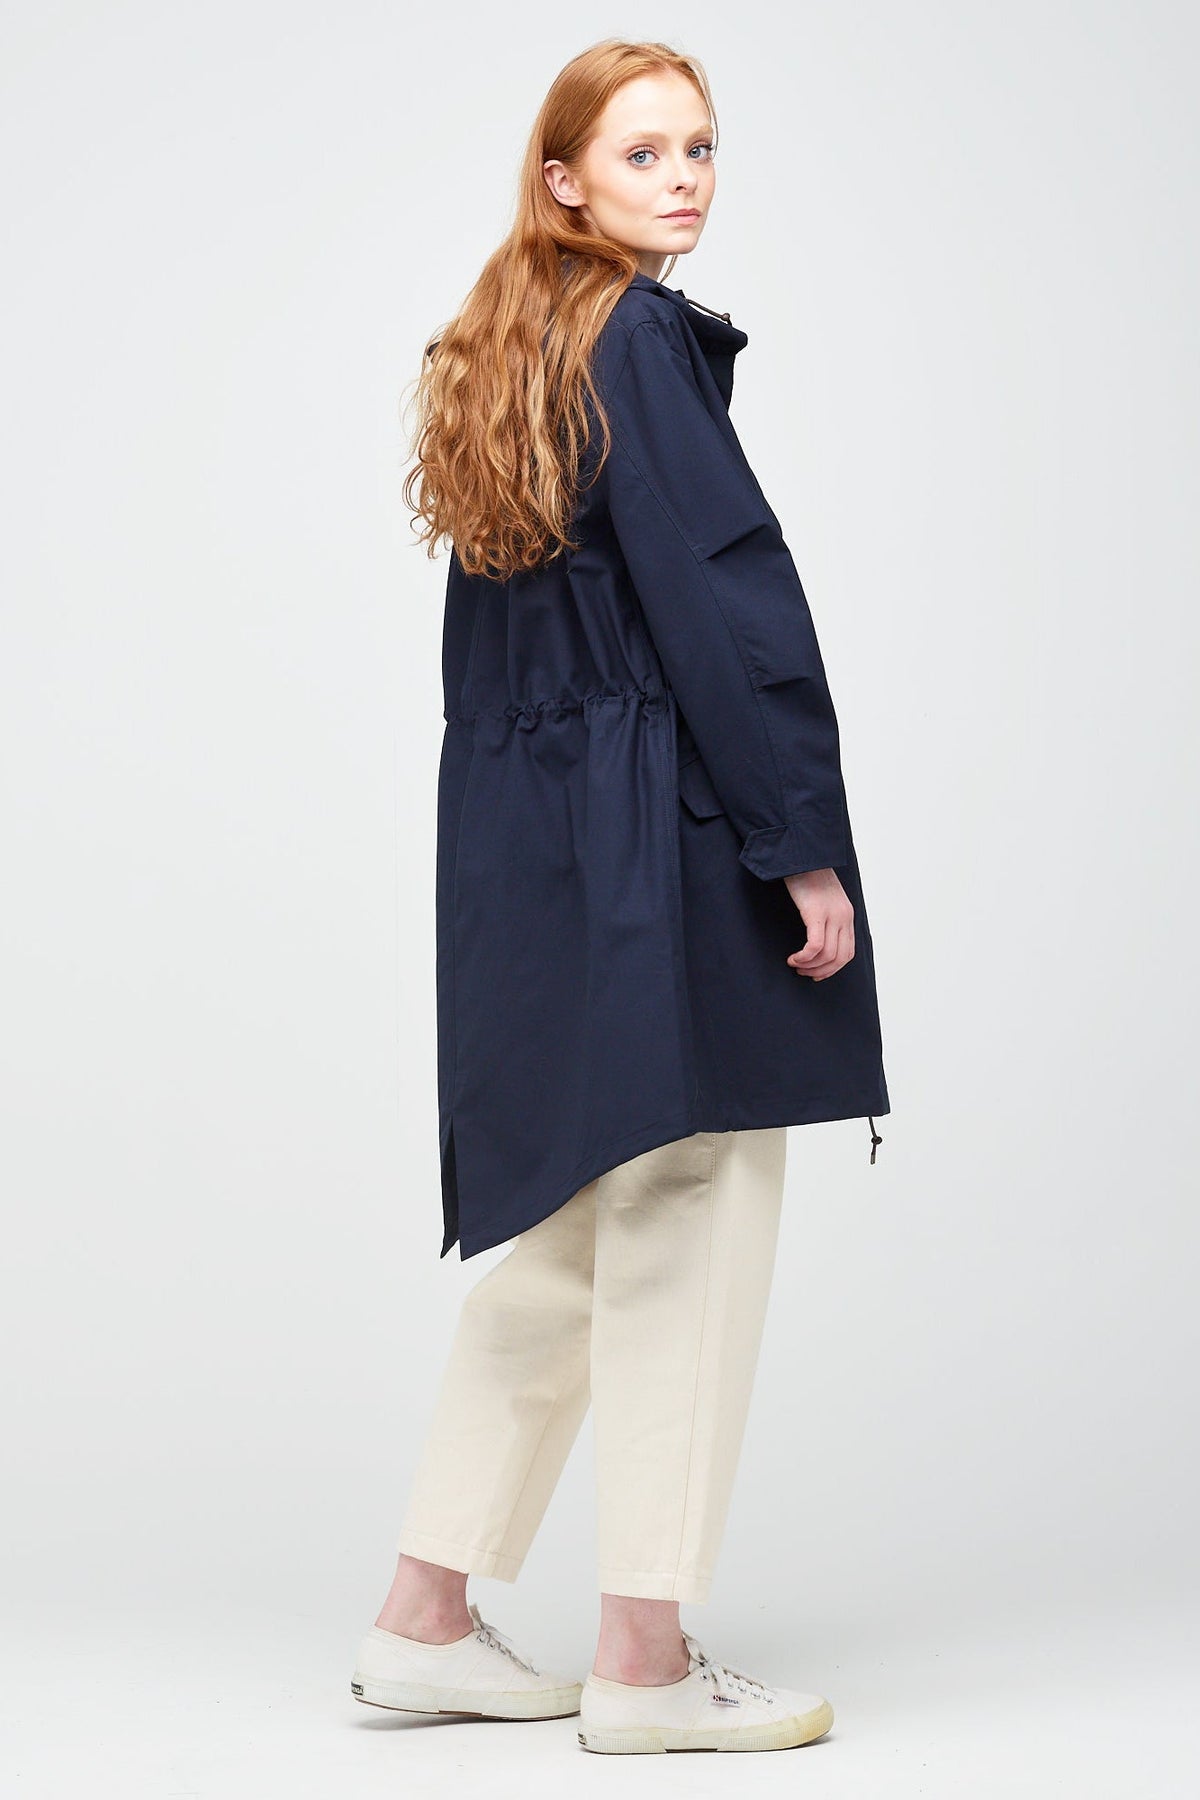 
            Rear shot of A young, white female model with ginger hair wearing a long navy parka unzipped. The parka is styled with a navy striped breton top &amp; ecru jeans.